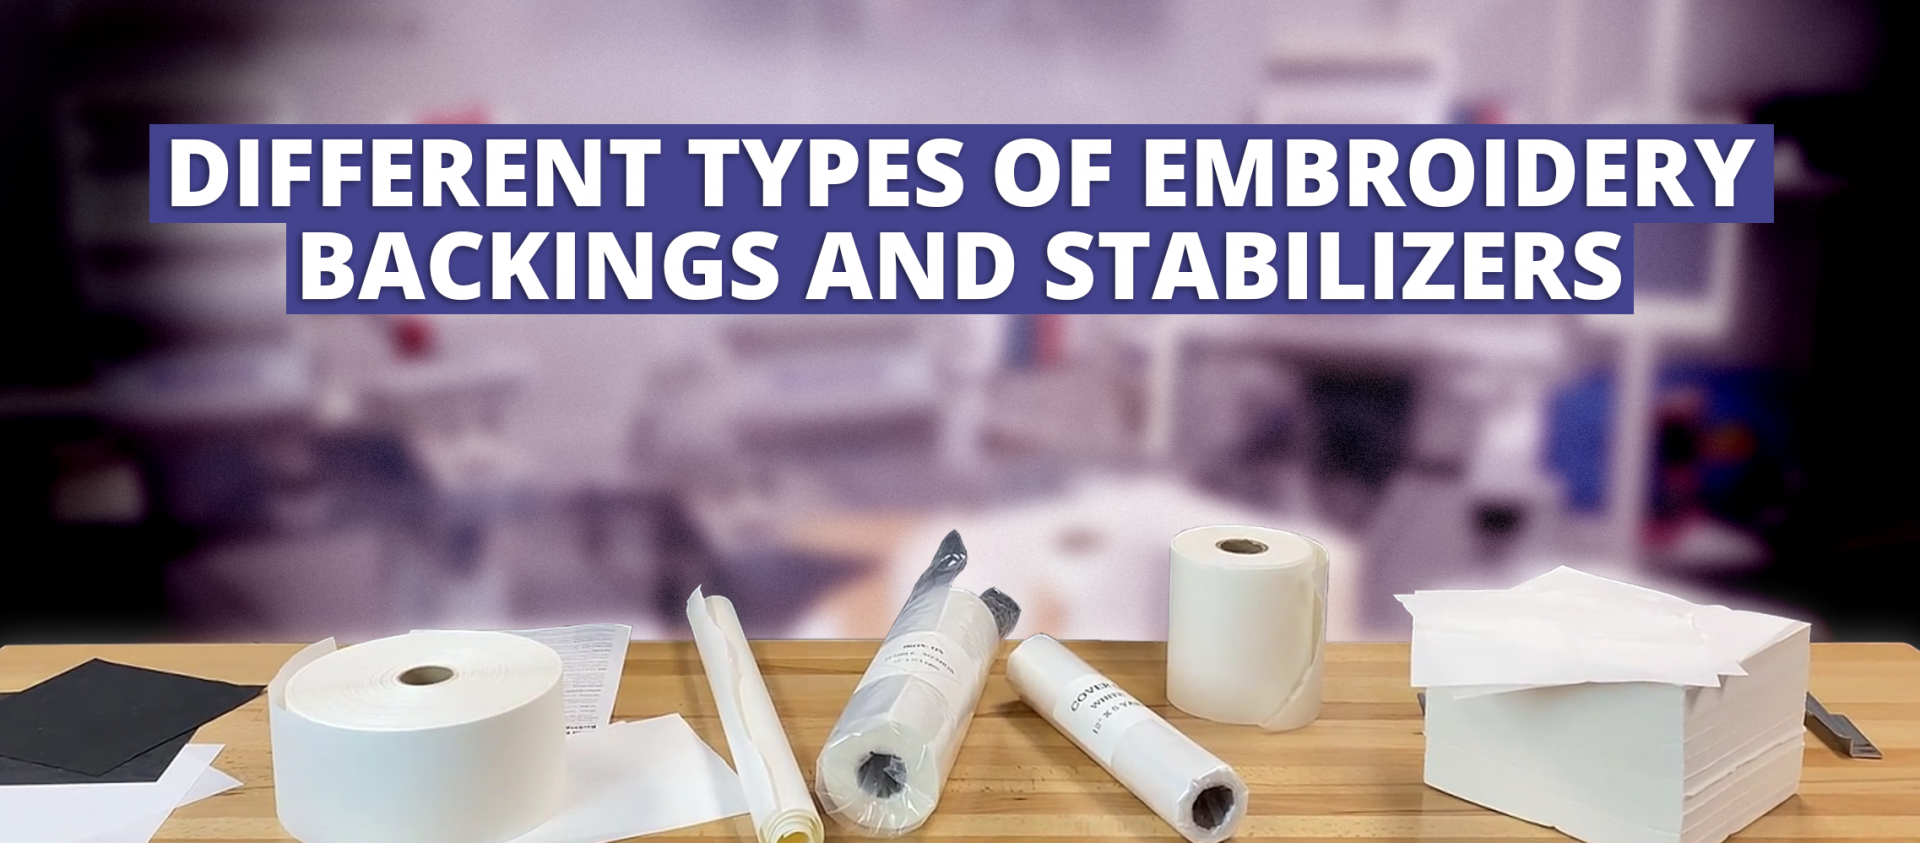 Understanding-the-Different-Types-of-Embroidery-Backings-and-Stabilizers-article-v2